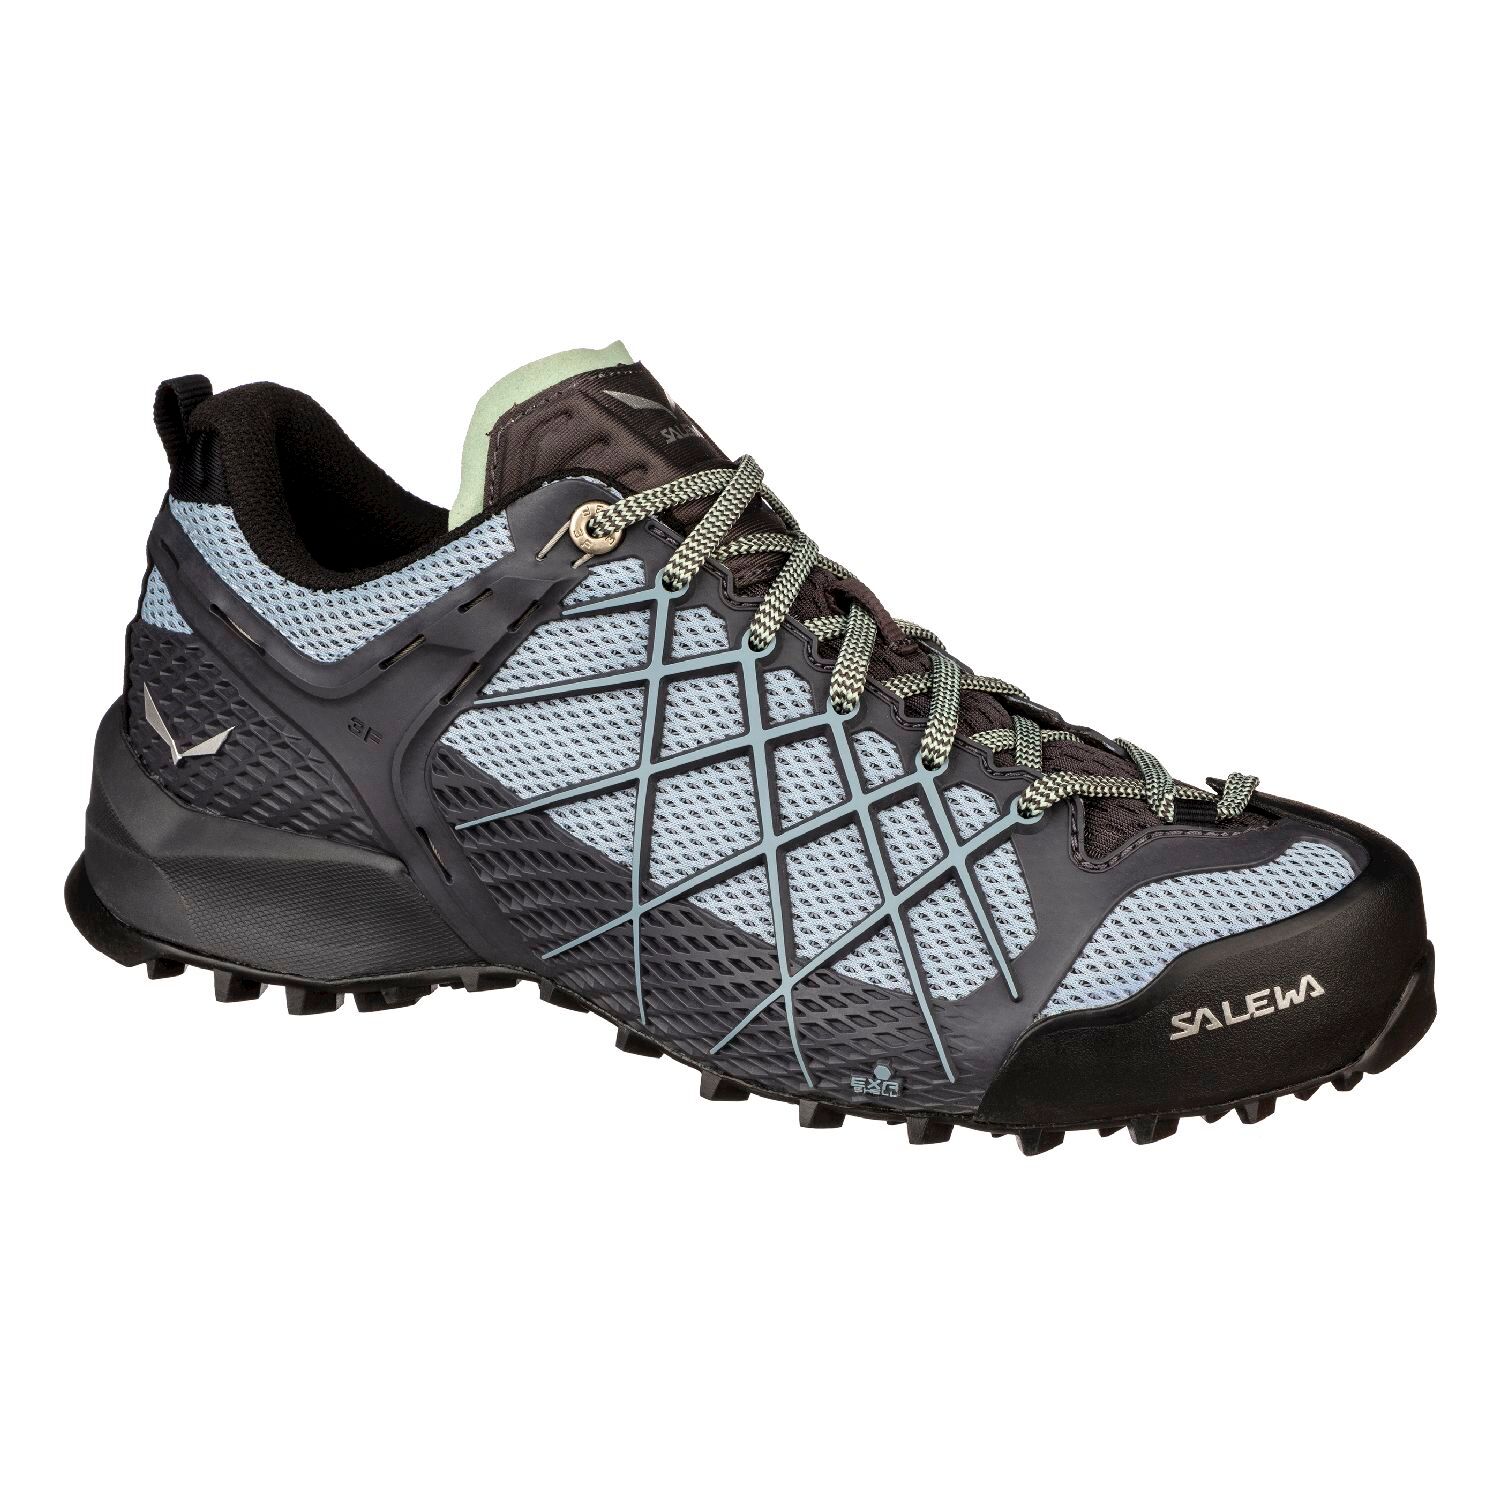 Salewa - Ws Wildfire - Approach shoes - Women's